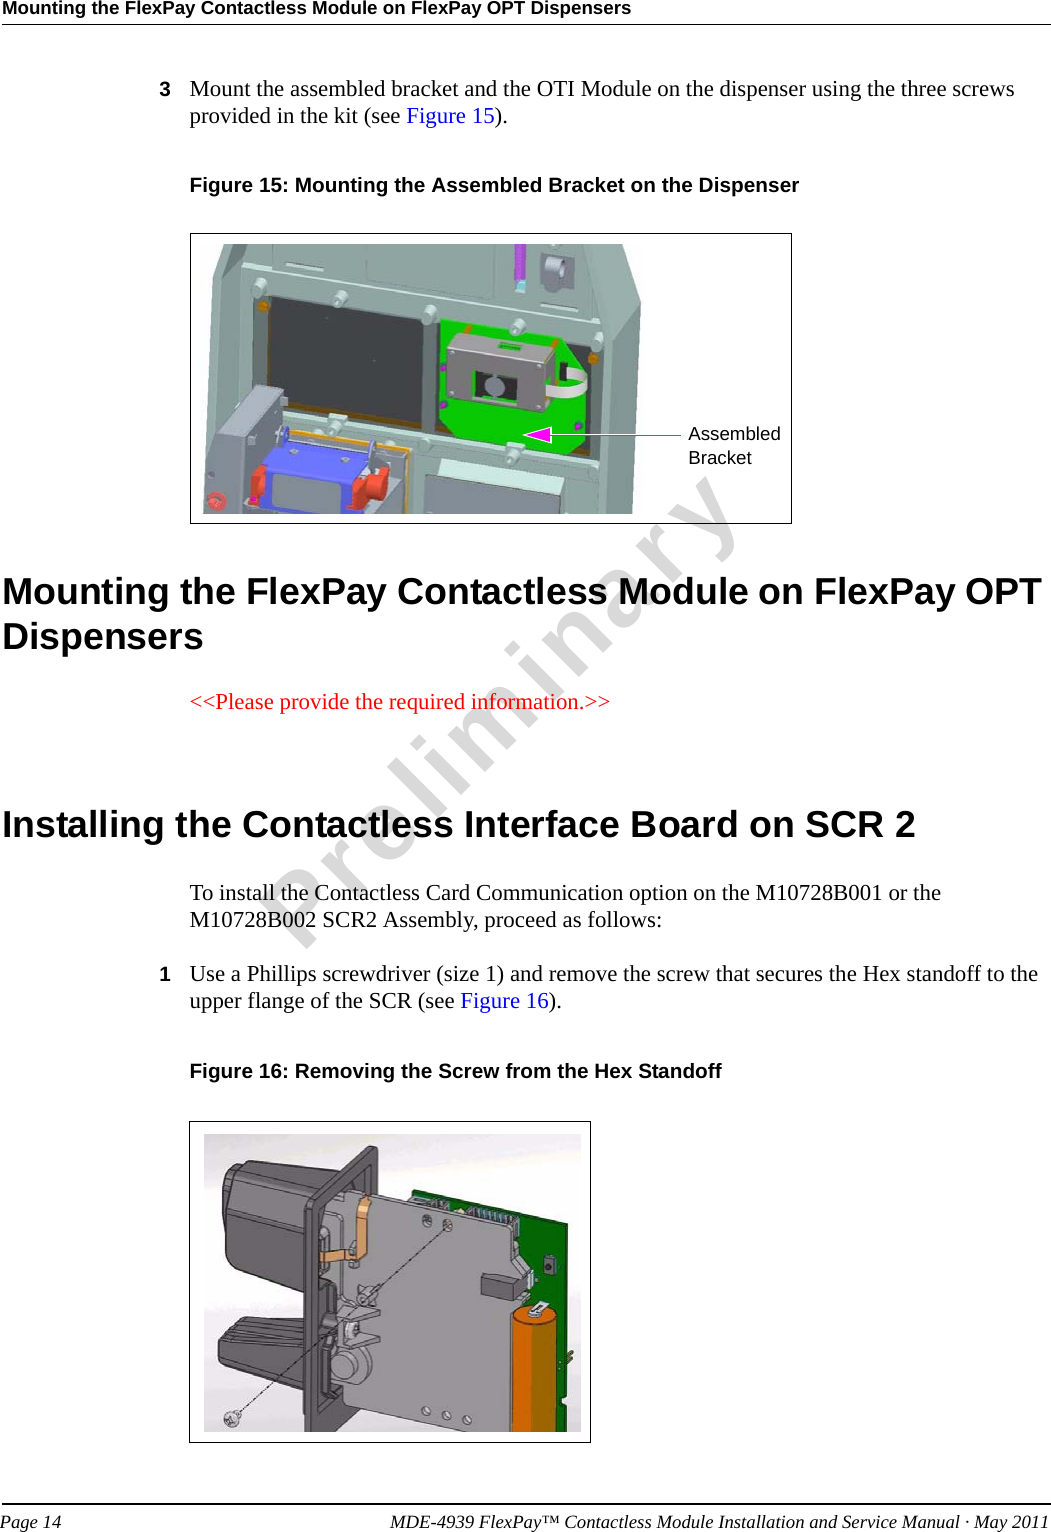 Mounting the FlexPay Contactless Module on FlexPay OPT DispensersPreliminaryPage 14            MDE-4939 FlexPay™ Contactless Module Installation and Service Manual · May 20113Mount the assembled bracket and the OTI Module on the dispenser using the three screws provided in the kit (see Figure 15).Figure 15: Mounting the Assembled Bracket on the DispenserAssembled BracketMounting the FlexPay Contactless Module on FlexPay OPT Dispensers&lt;&lt;Please provide the required information.&gt;&gt;Installing the Contactless Interface Board on SCR 2To install the Contactless Card Communication option on the M10728B001 or the M10728B002 SCR2 Assembly, proceed as follows: 1Use a Phillips screwdriver (size 1) and remove the screw that secures the Hex standoff to the upper flange of the SCR (see Figure 16).Figure 16: Removing the Screw from the Hex Standoff 